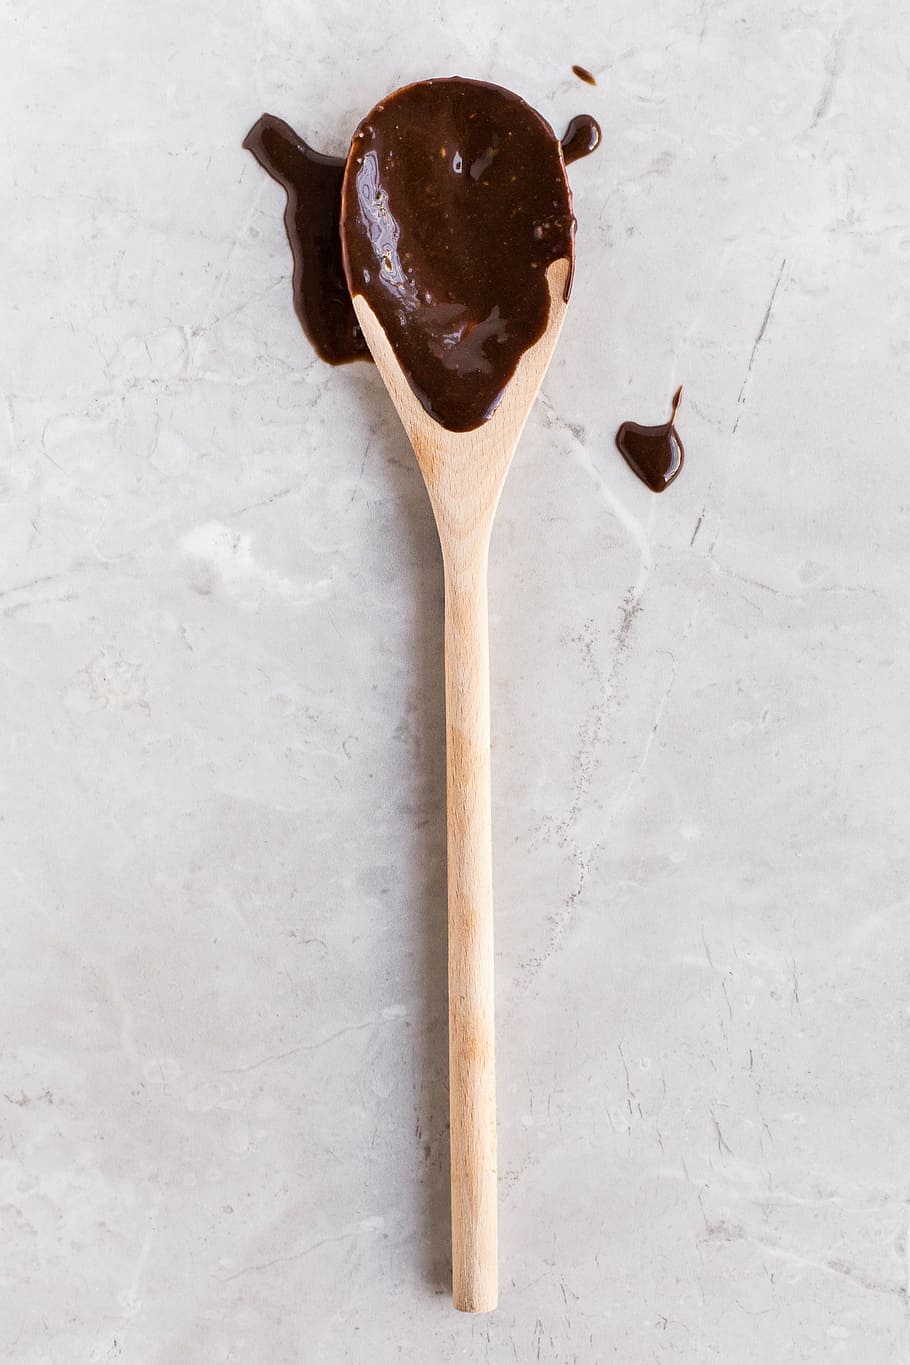 beige, wooden, ladle, white, surface, chocolate, dip, laddle, spoon, wood